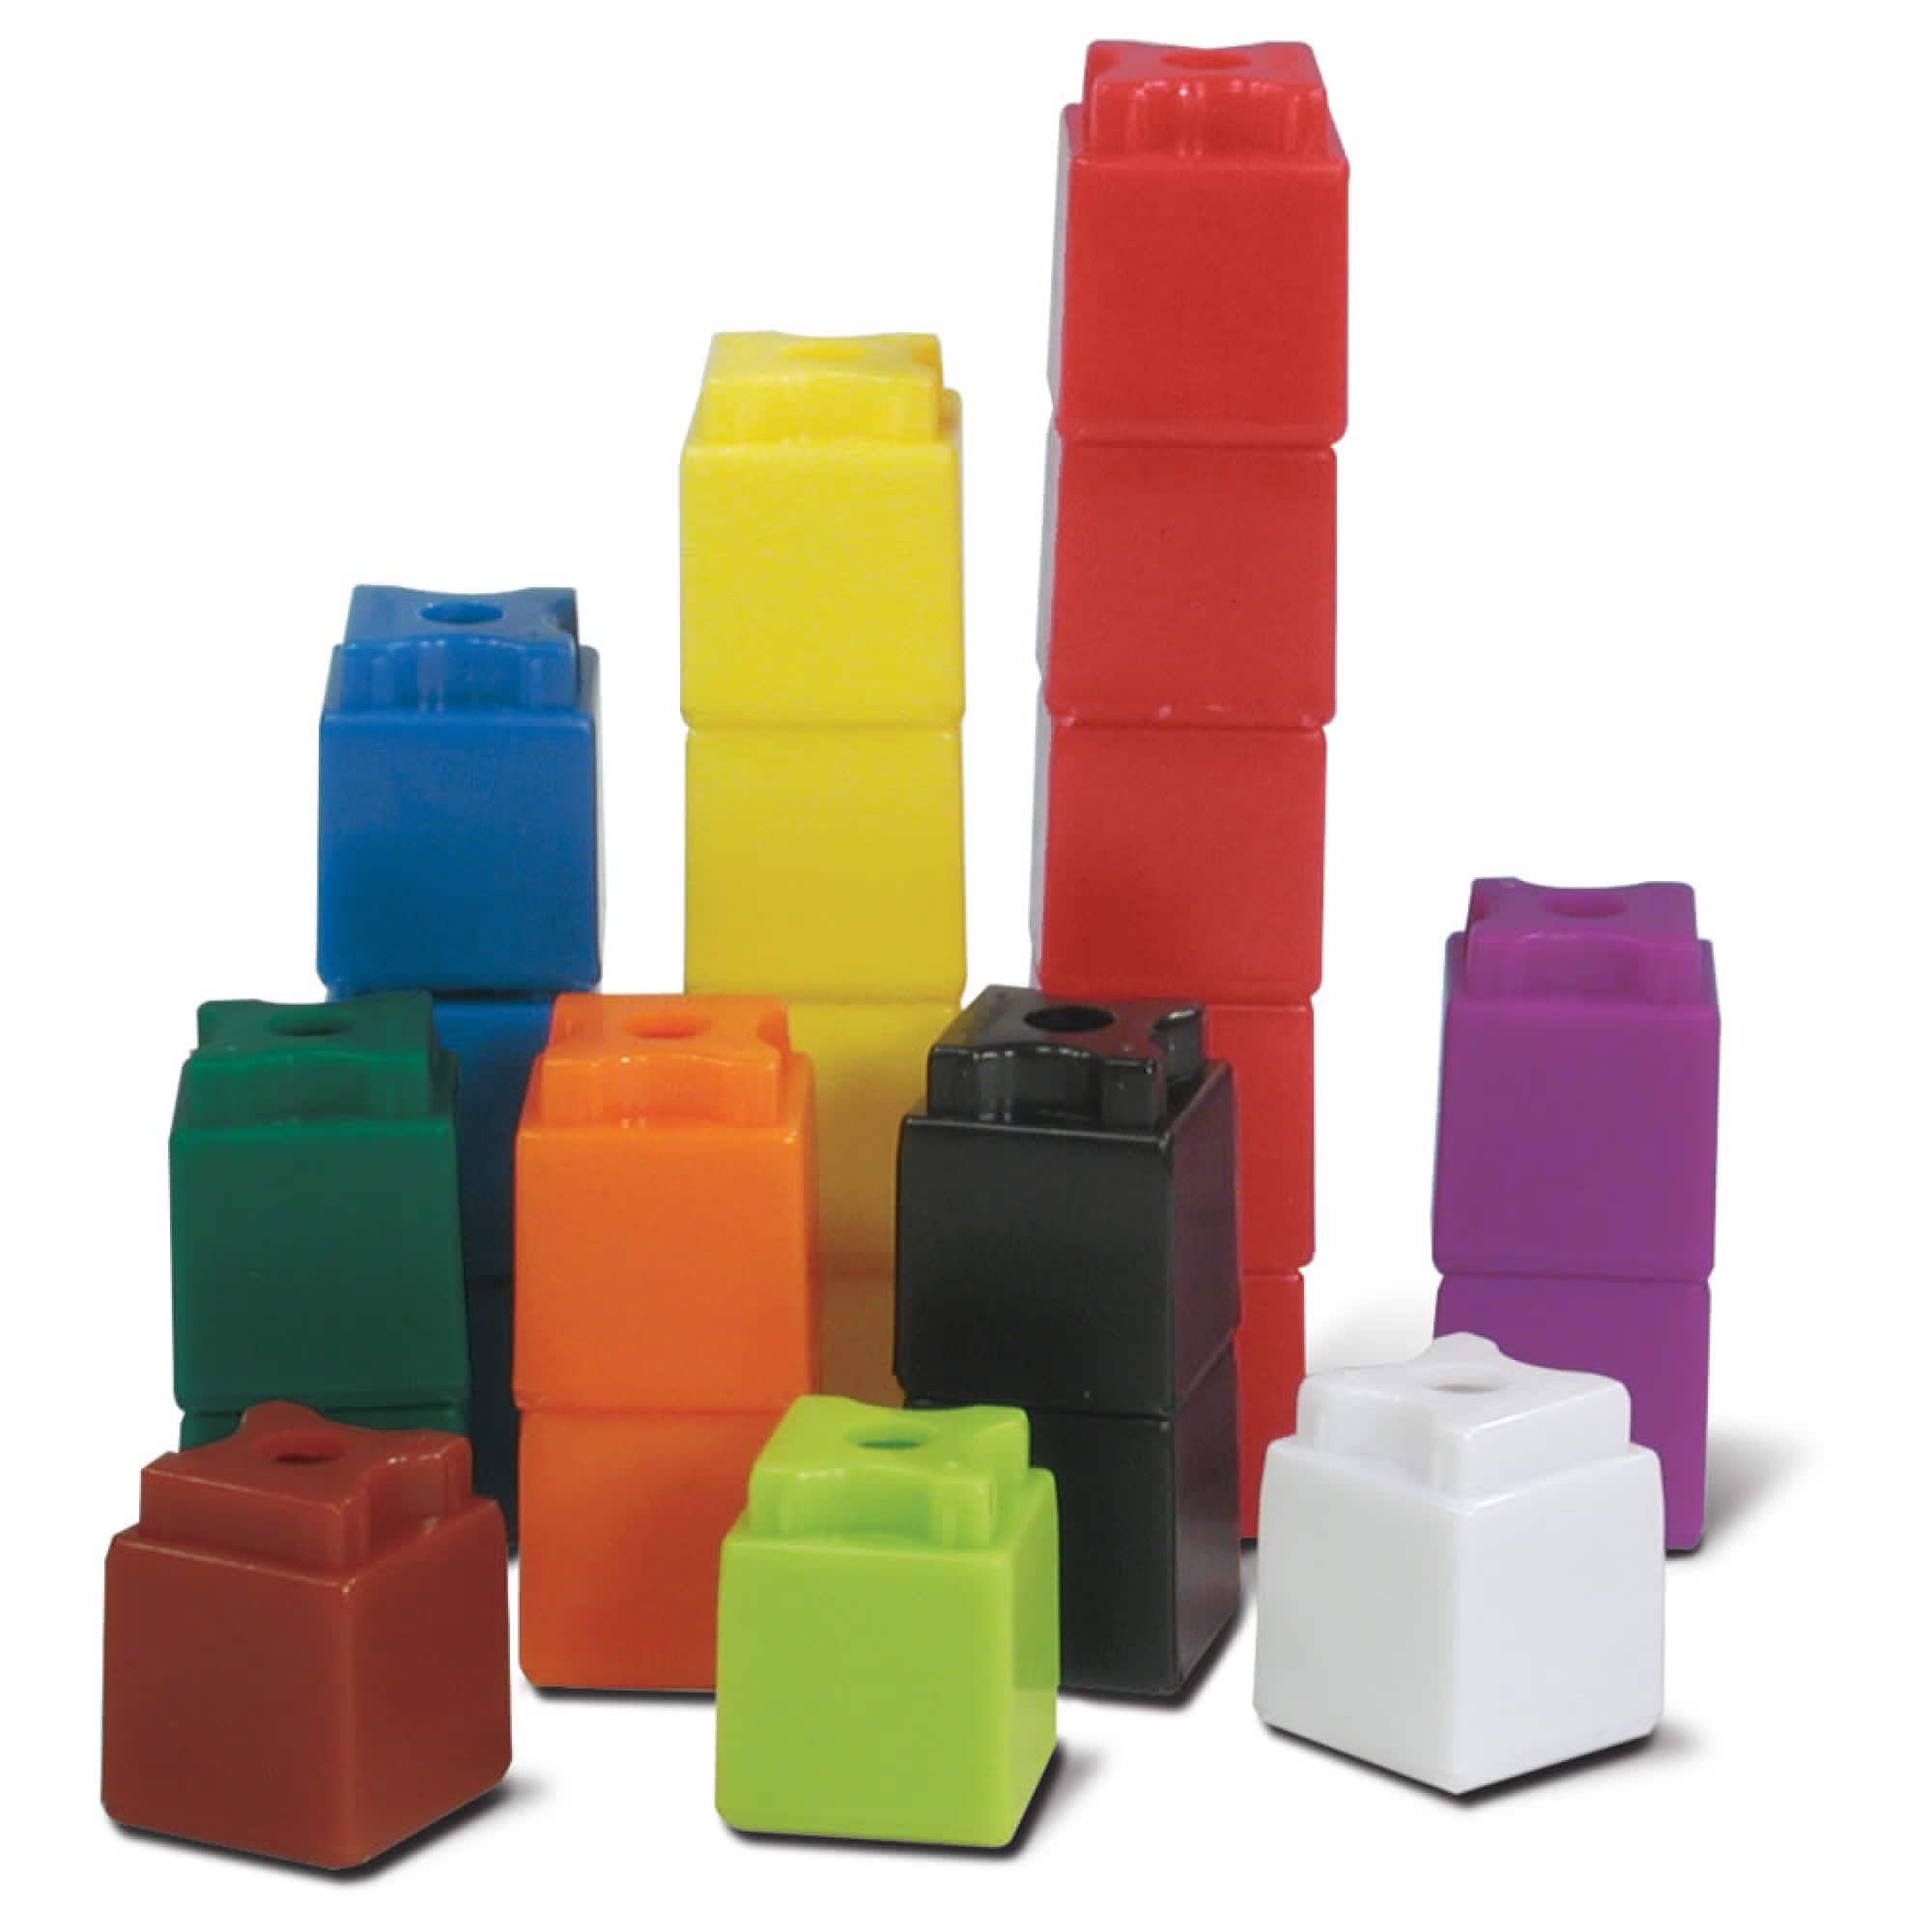  hand2mind Foam Blocks, Counting Cubes for Kids Math, 1